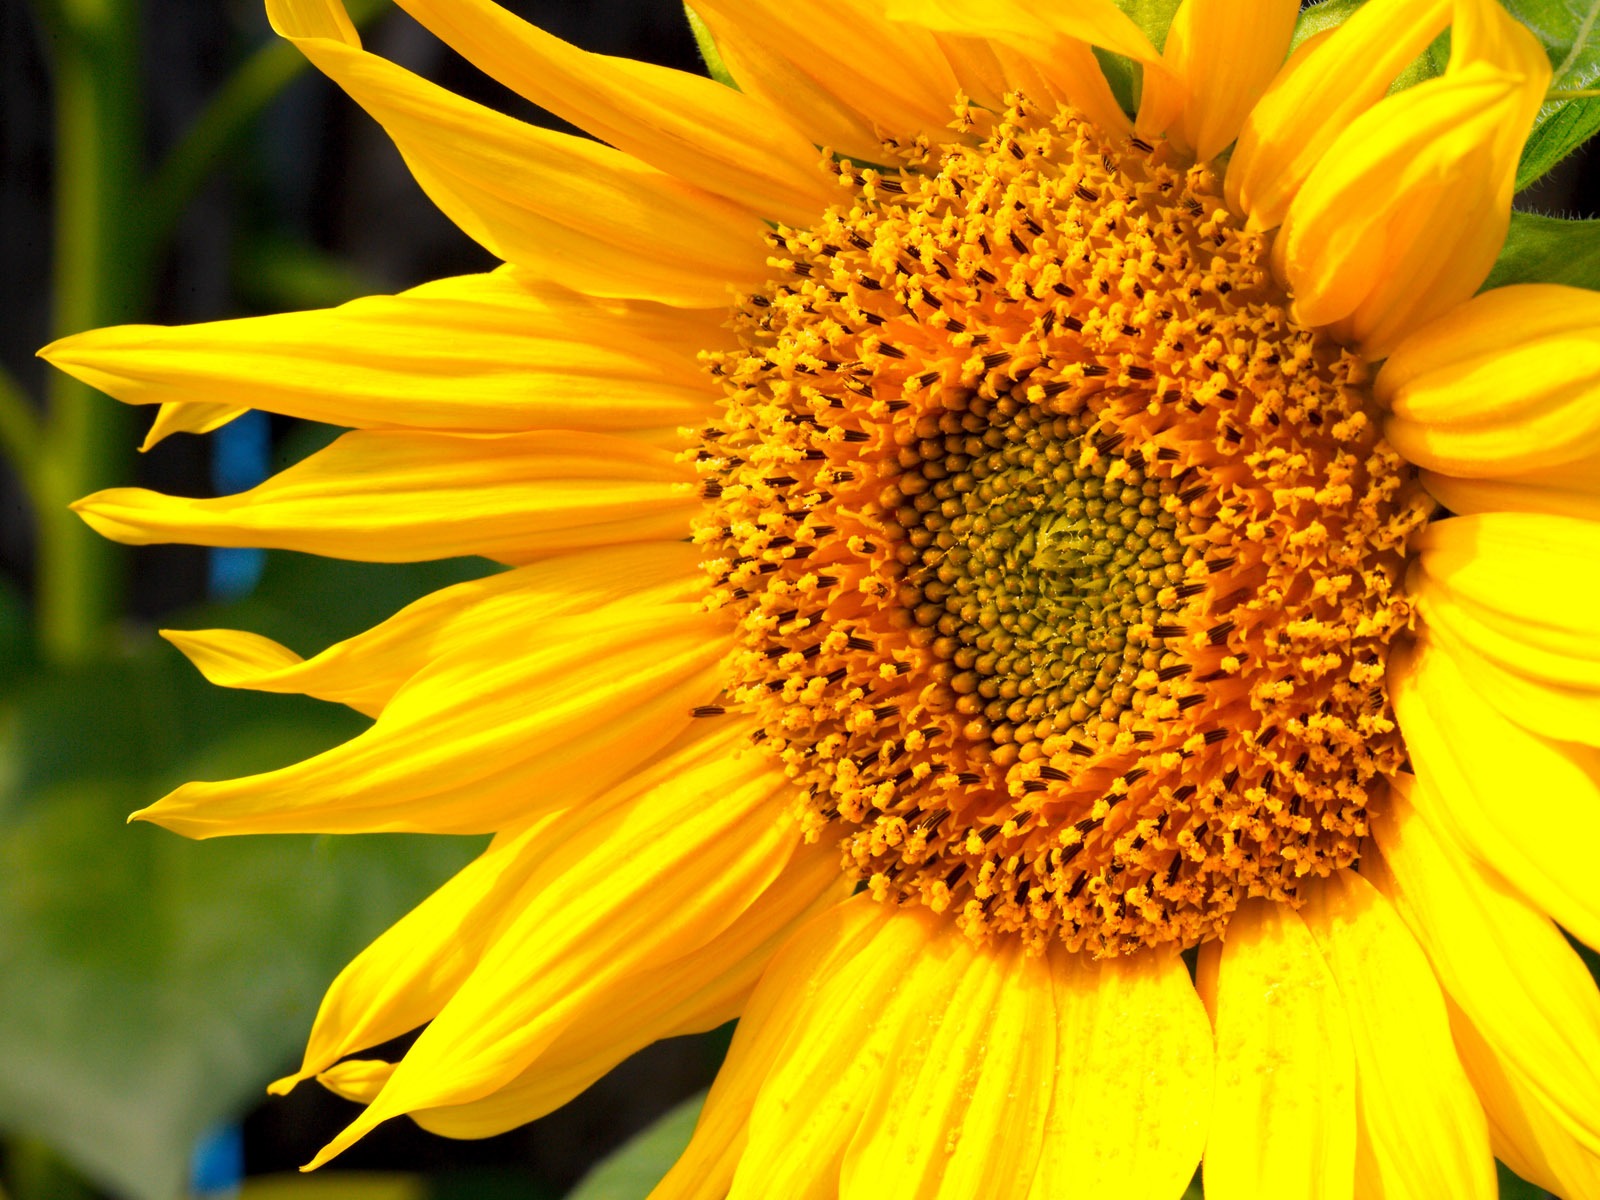 Sunny sunflower photo HD Wallpapers #37 - 1600x1200